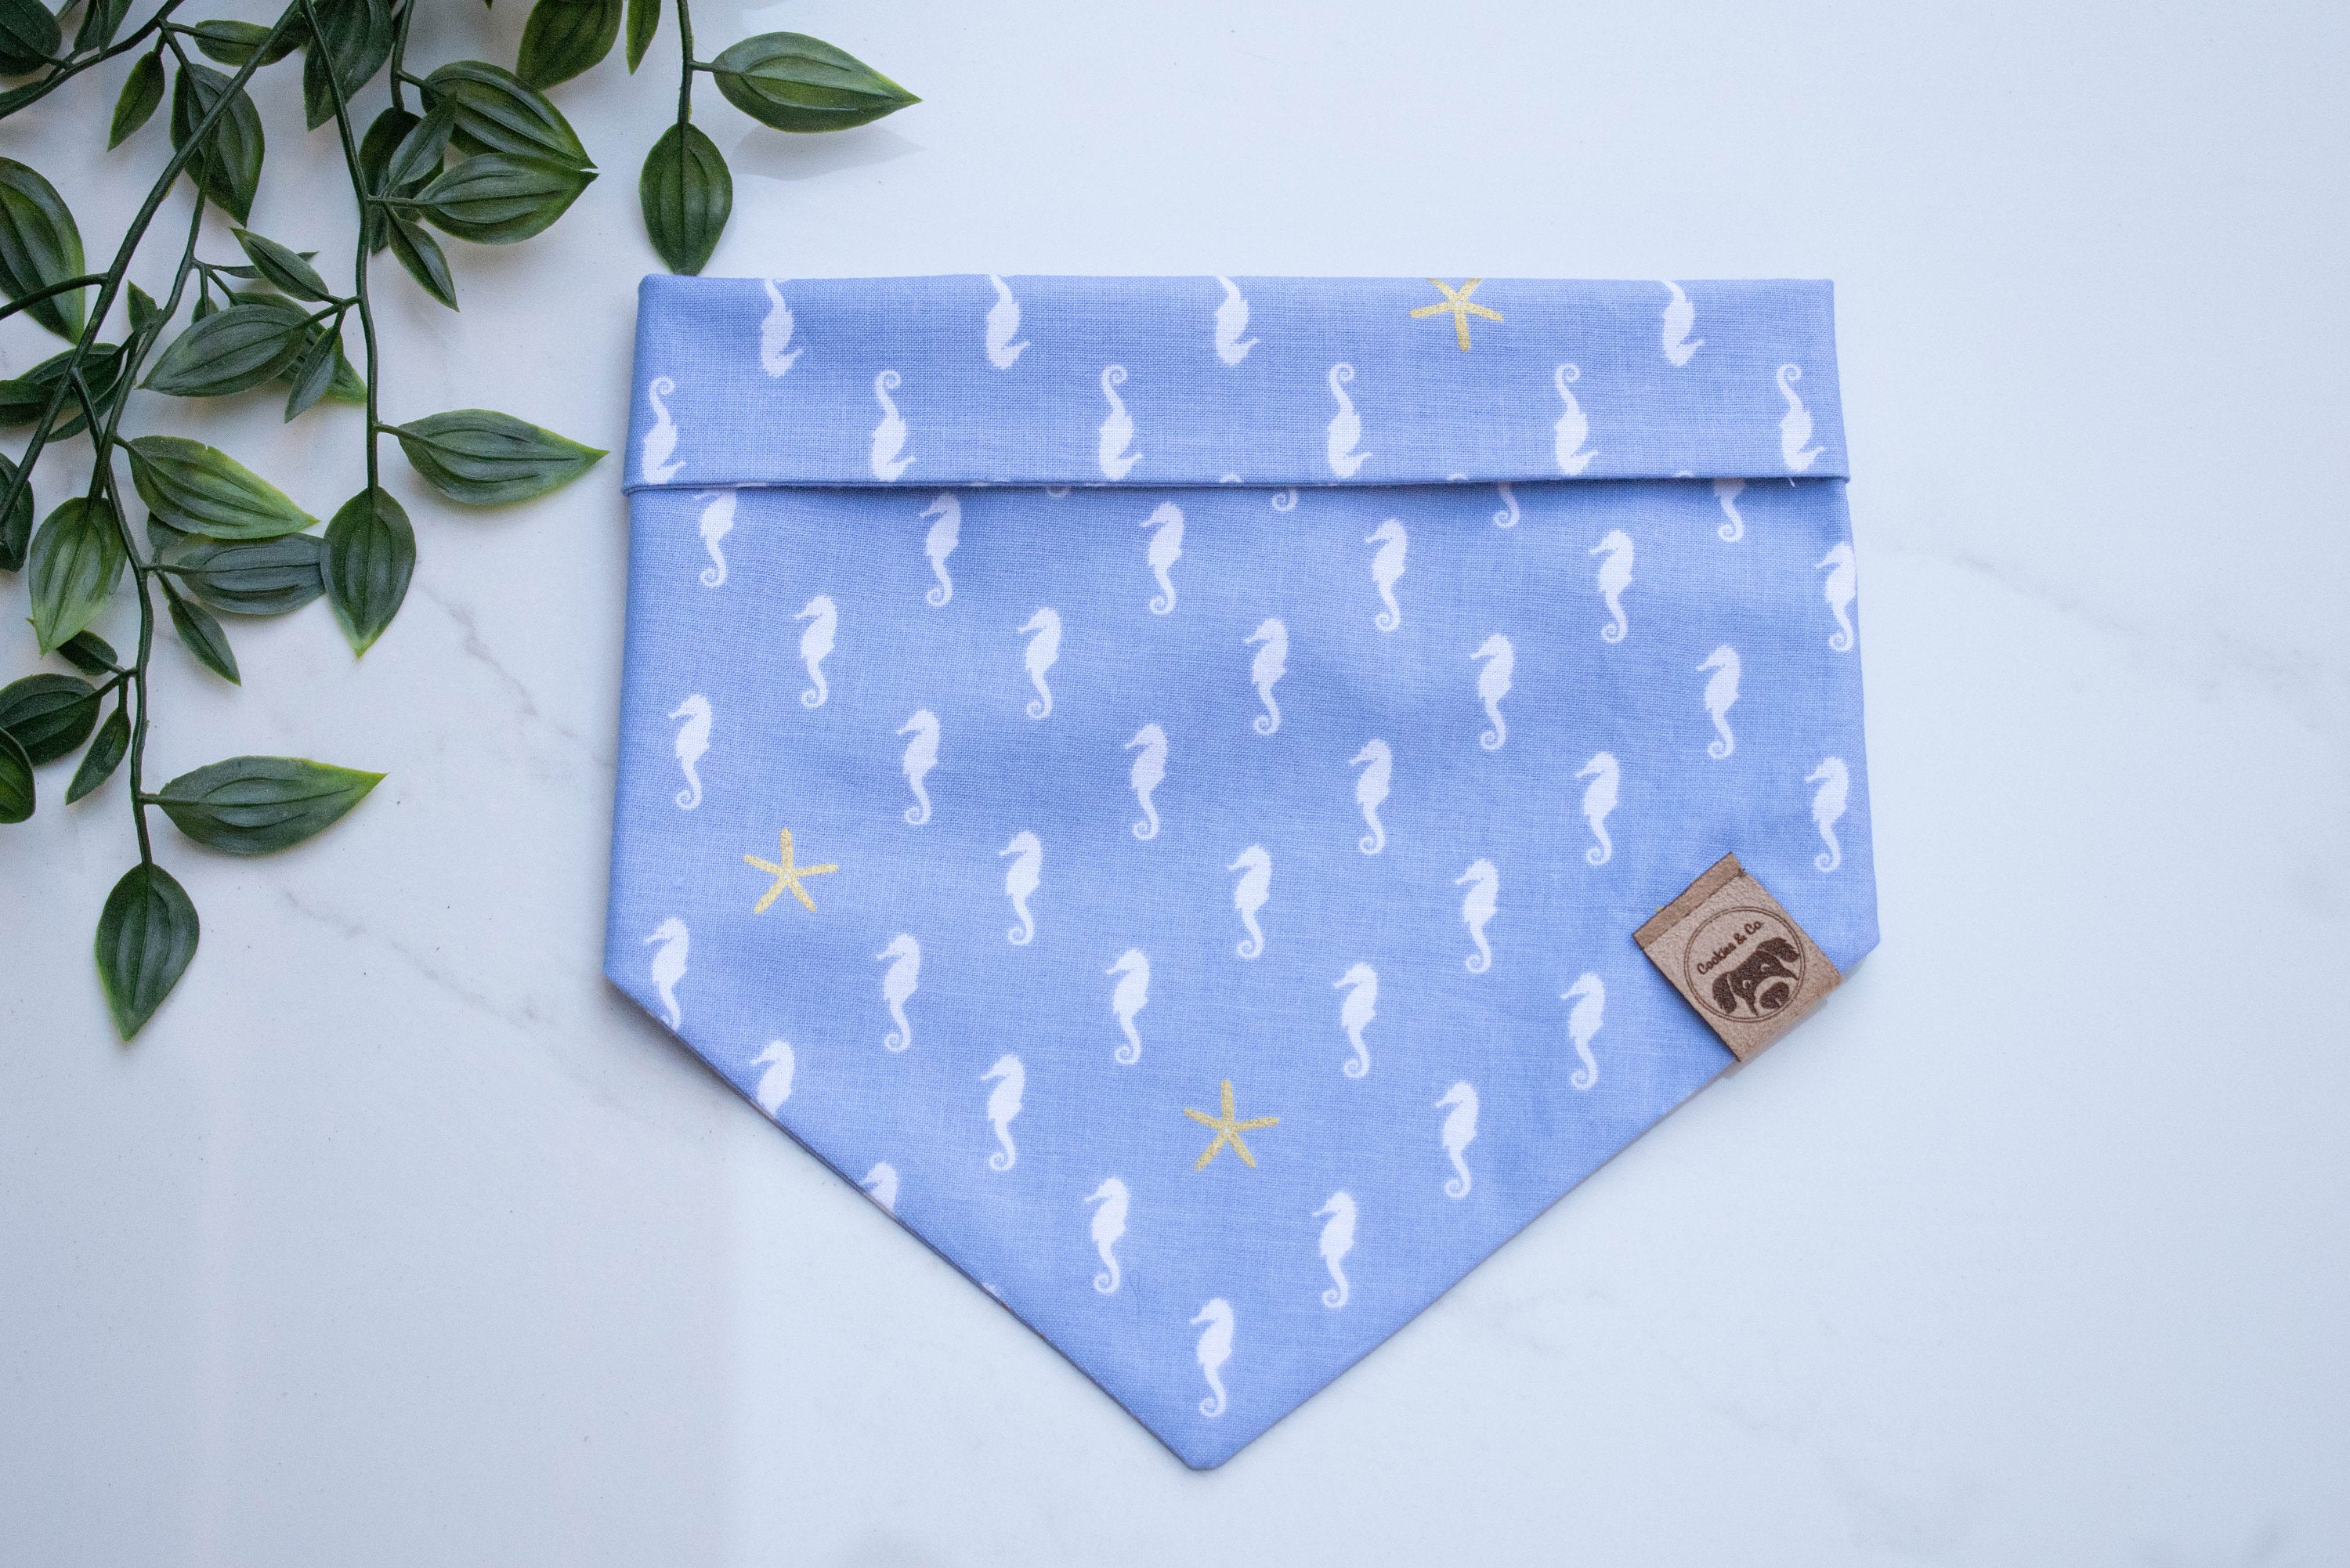 ea Horse bandana print, featuring rows of periwrinkle sea horses oriented facing left, with occasional yellow starfishes, on a light blue background